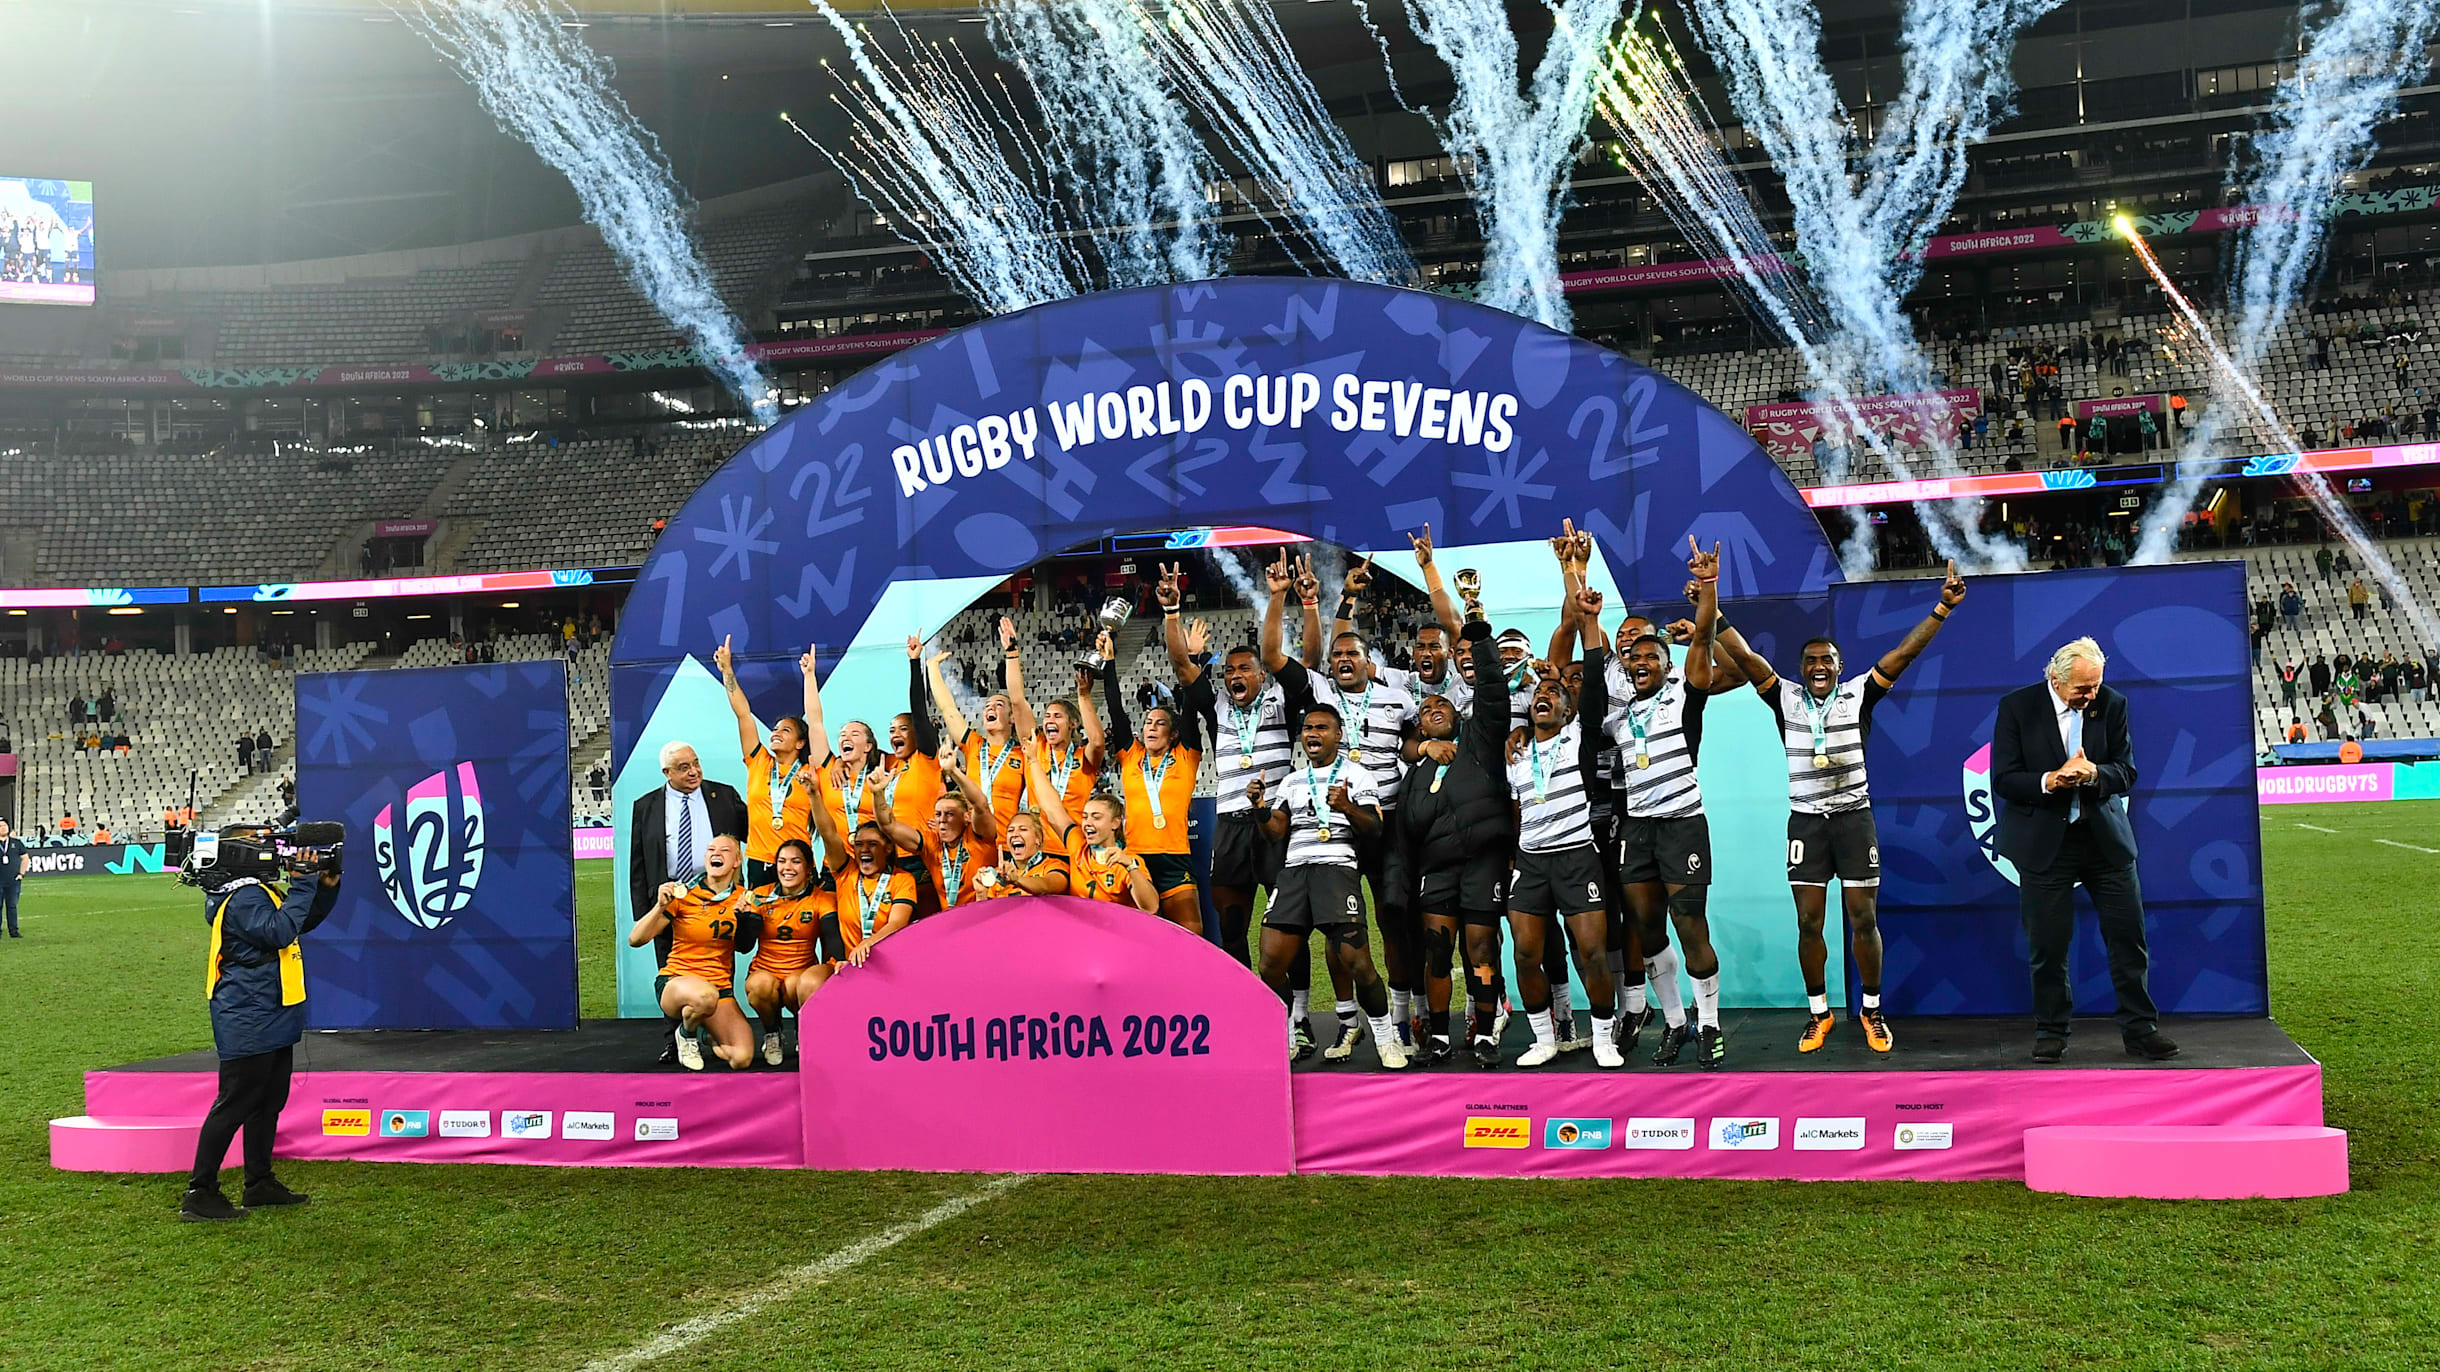 Fiji wins mens title at South Africa 2022 Rugby World Cup Sevens while Australia claim womens crown